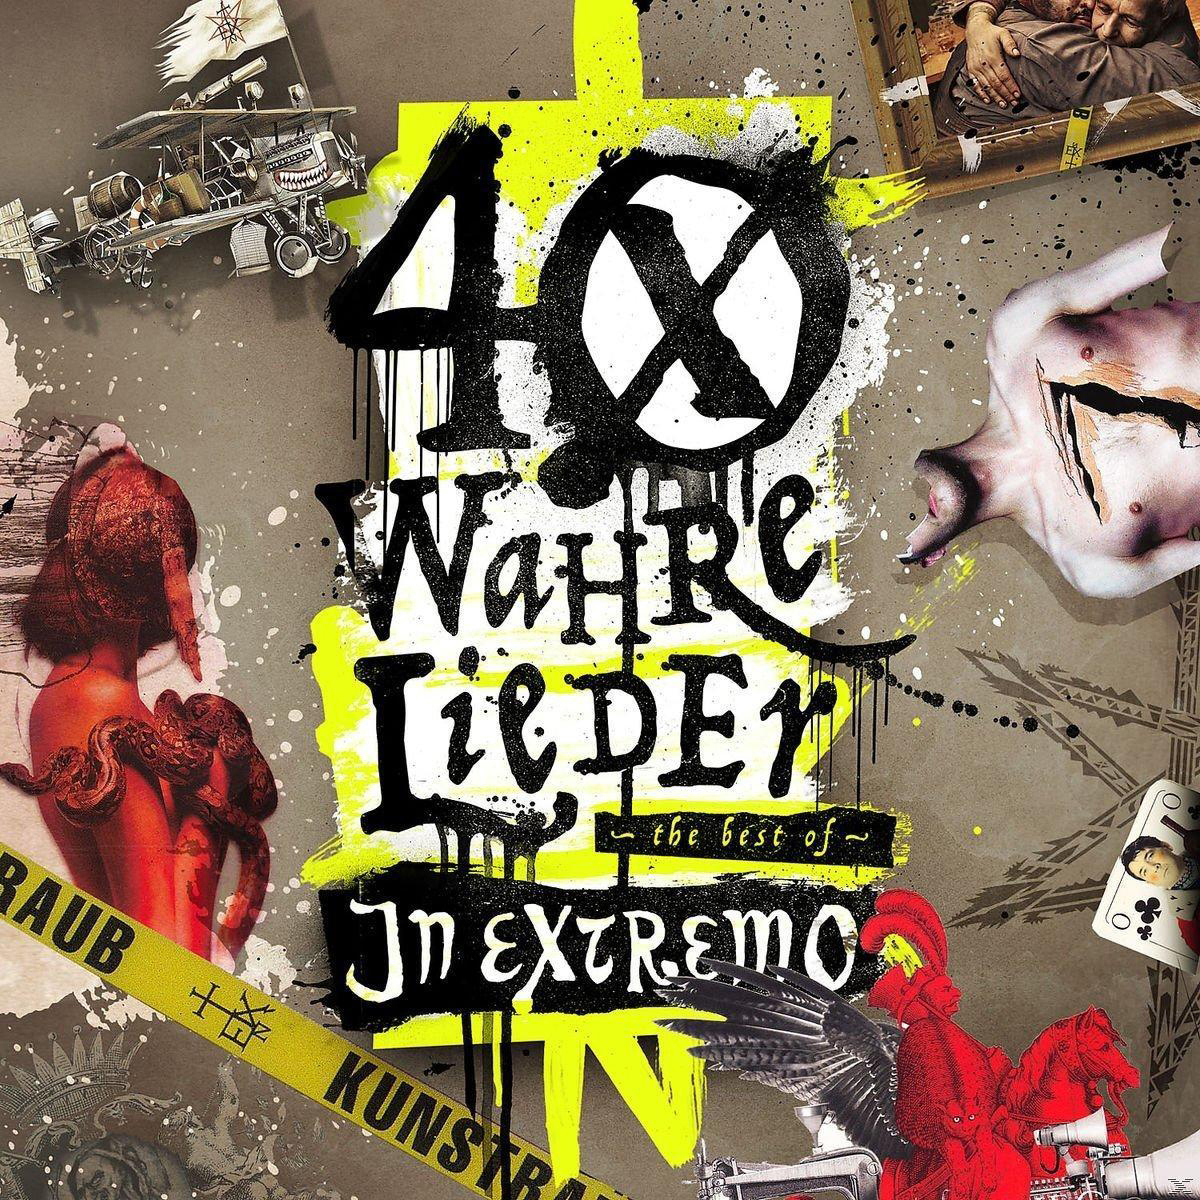 (CD) Of - - 40 Extremo Wahre Best Lieder-The In